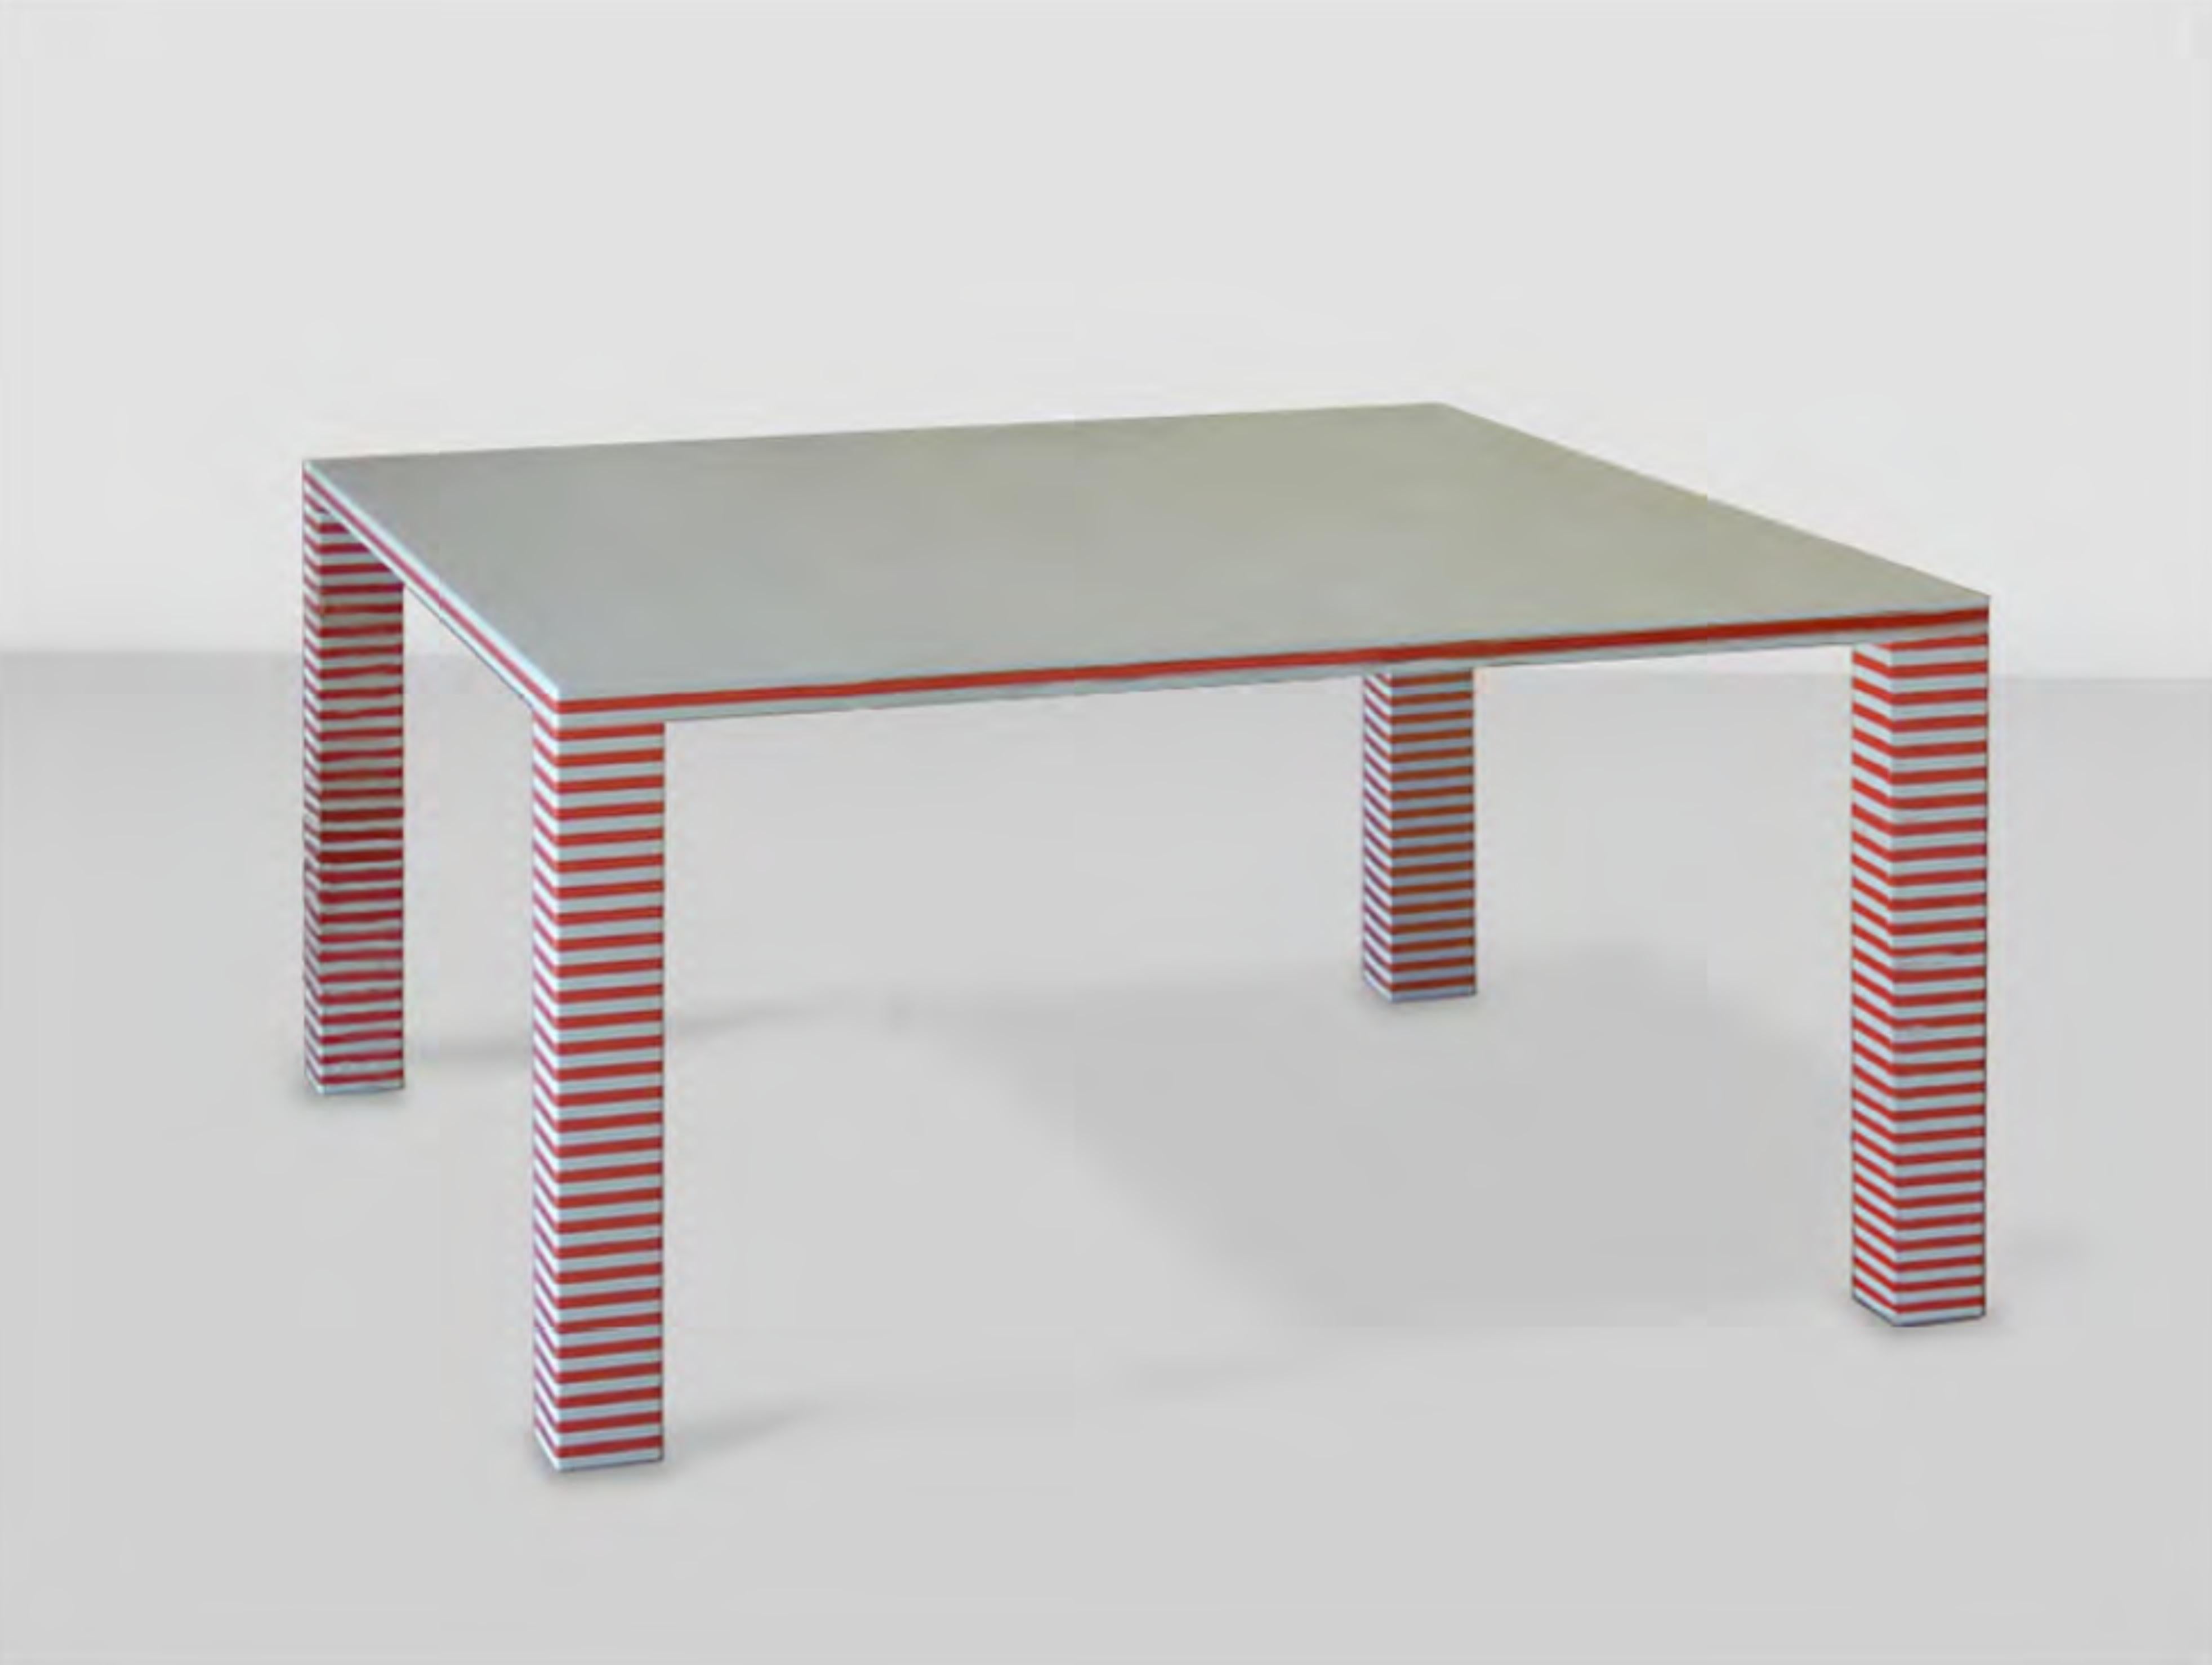 CF T22 dinner table by Caturegli Formica.
Dimensions: W 140 x D 140 H 73 cm.
Materials: Corain.


Biographical notes

Beppe Caturegli (1957) and Giovannella Formica (1957-2019) shared a background in the cultural atmosphere of the Radical